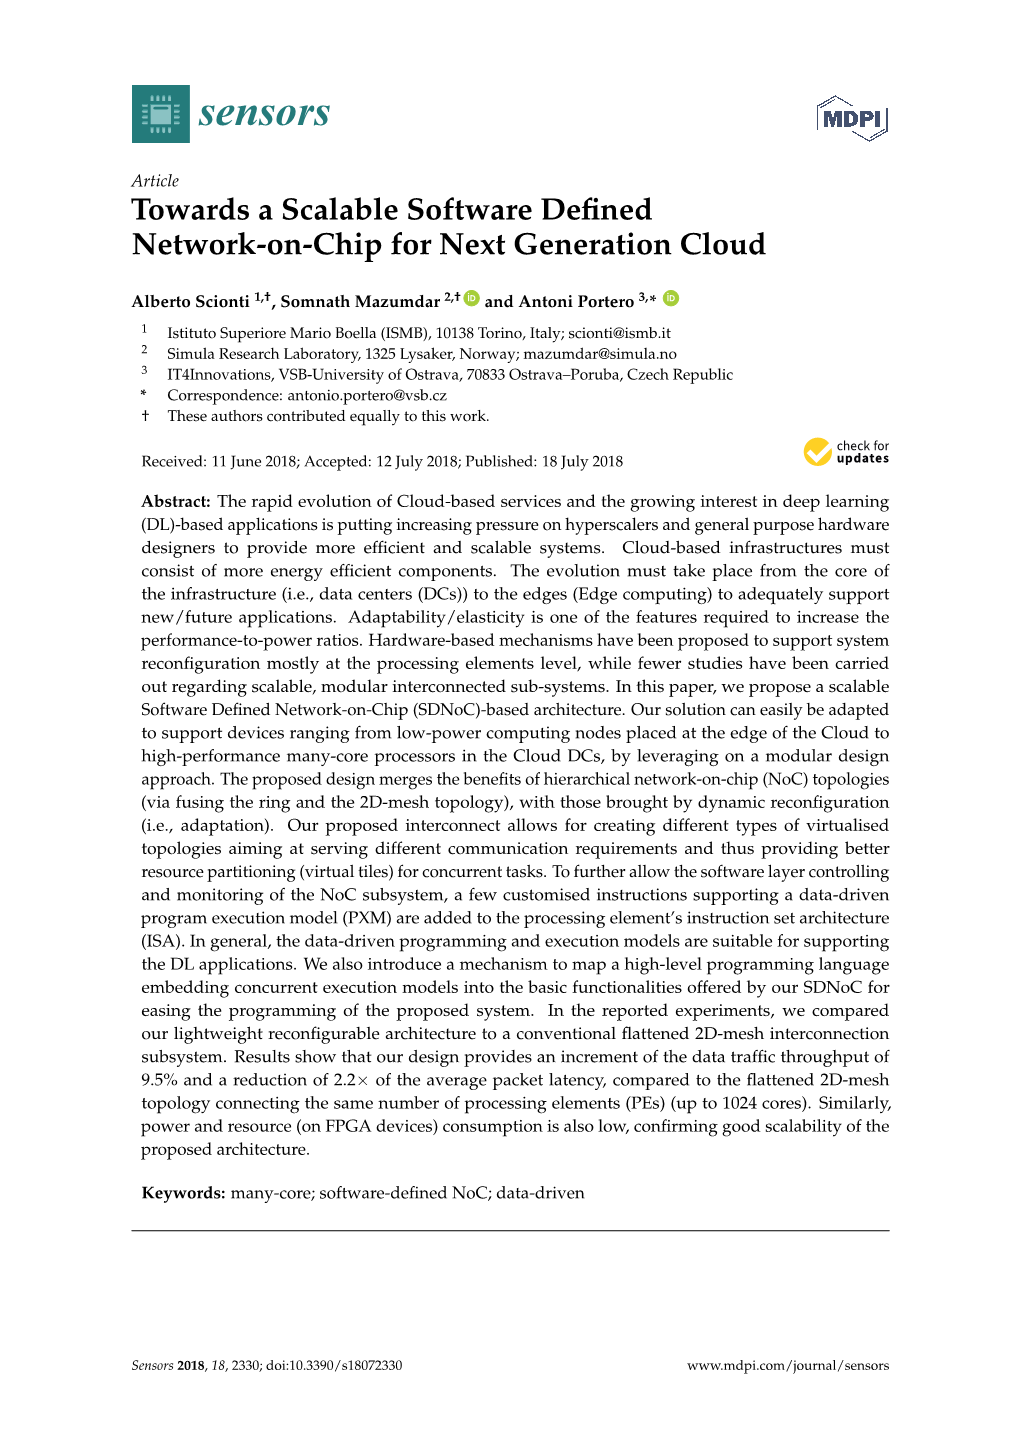 Towards a Scalable Software Defined Network-On-Chip for Next Generation Cloud